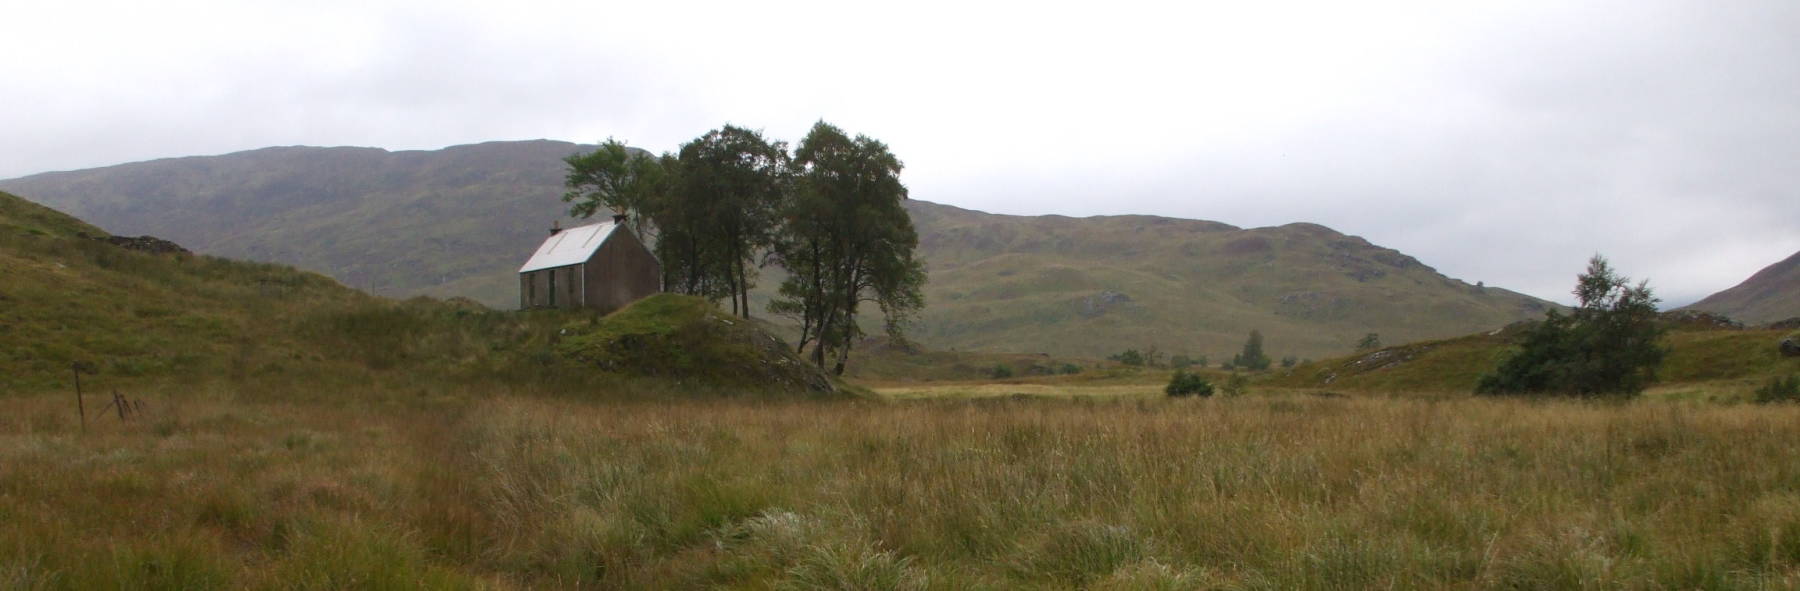 Staoineag Bothy, in Lochaber, in the Scottish Highlands.